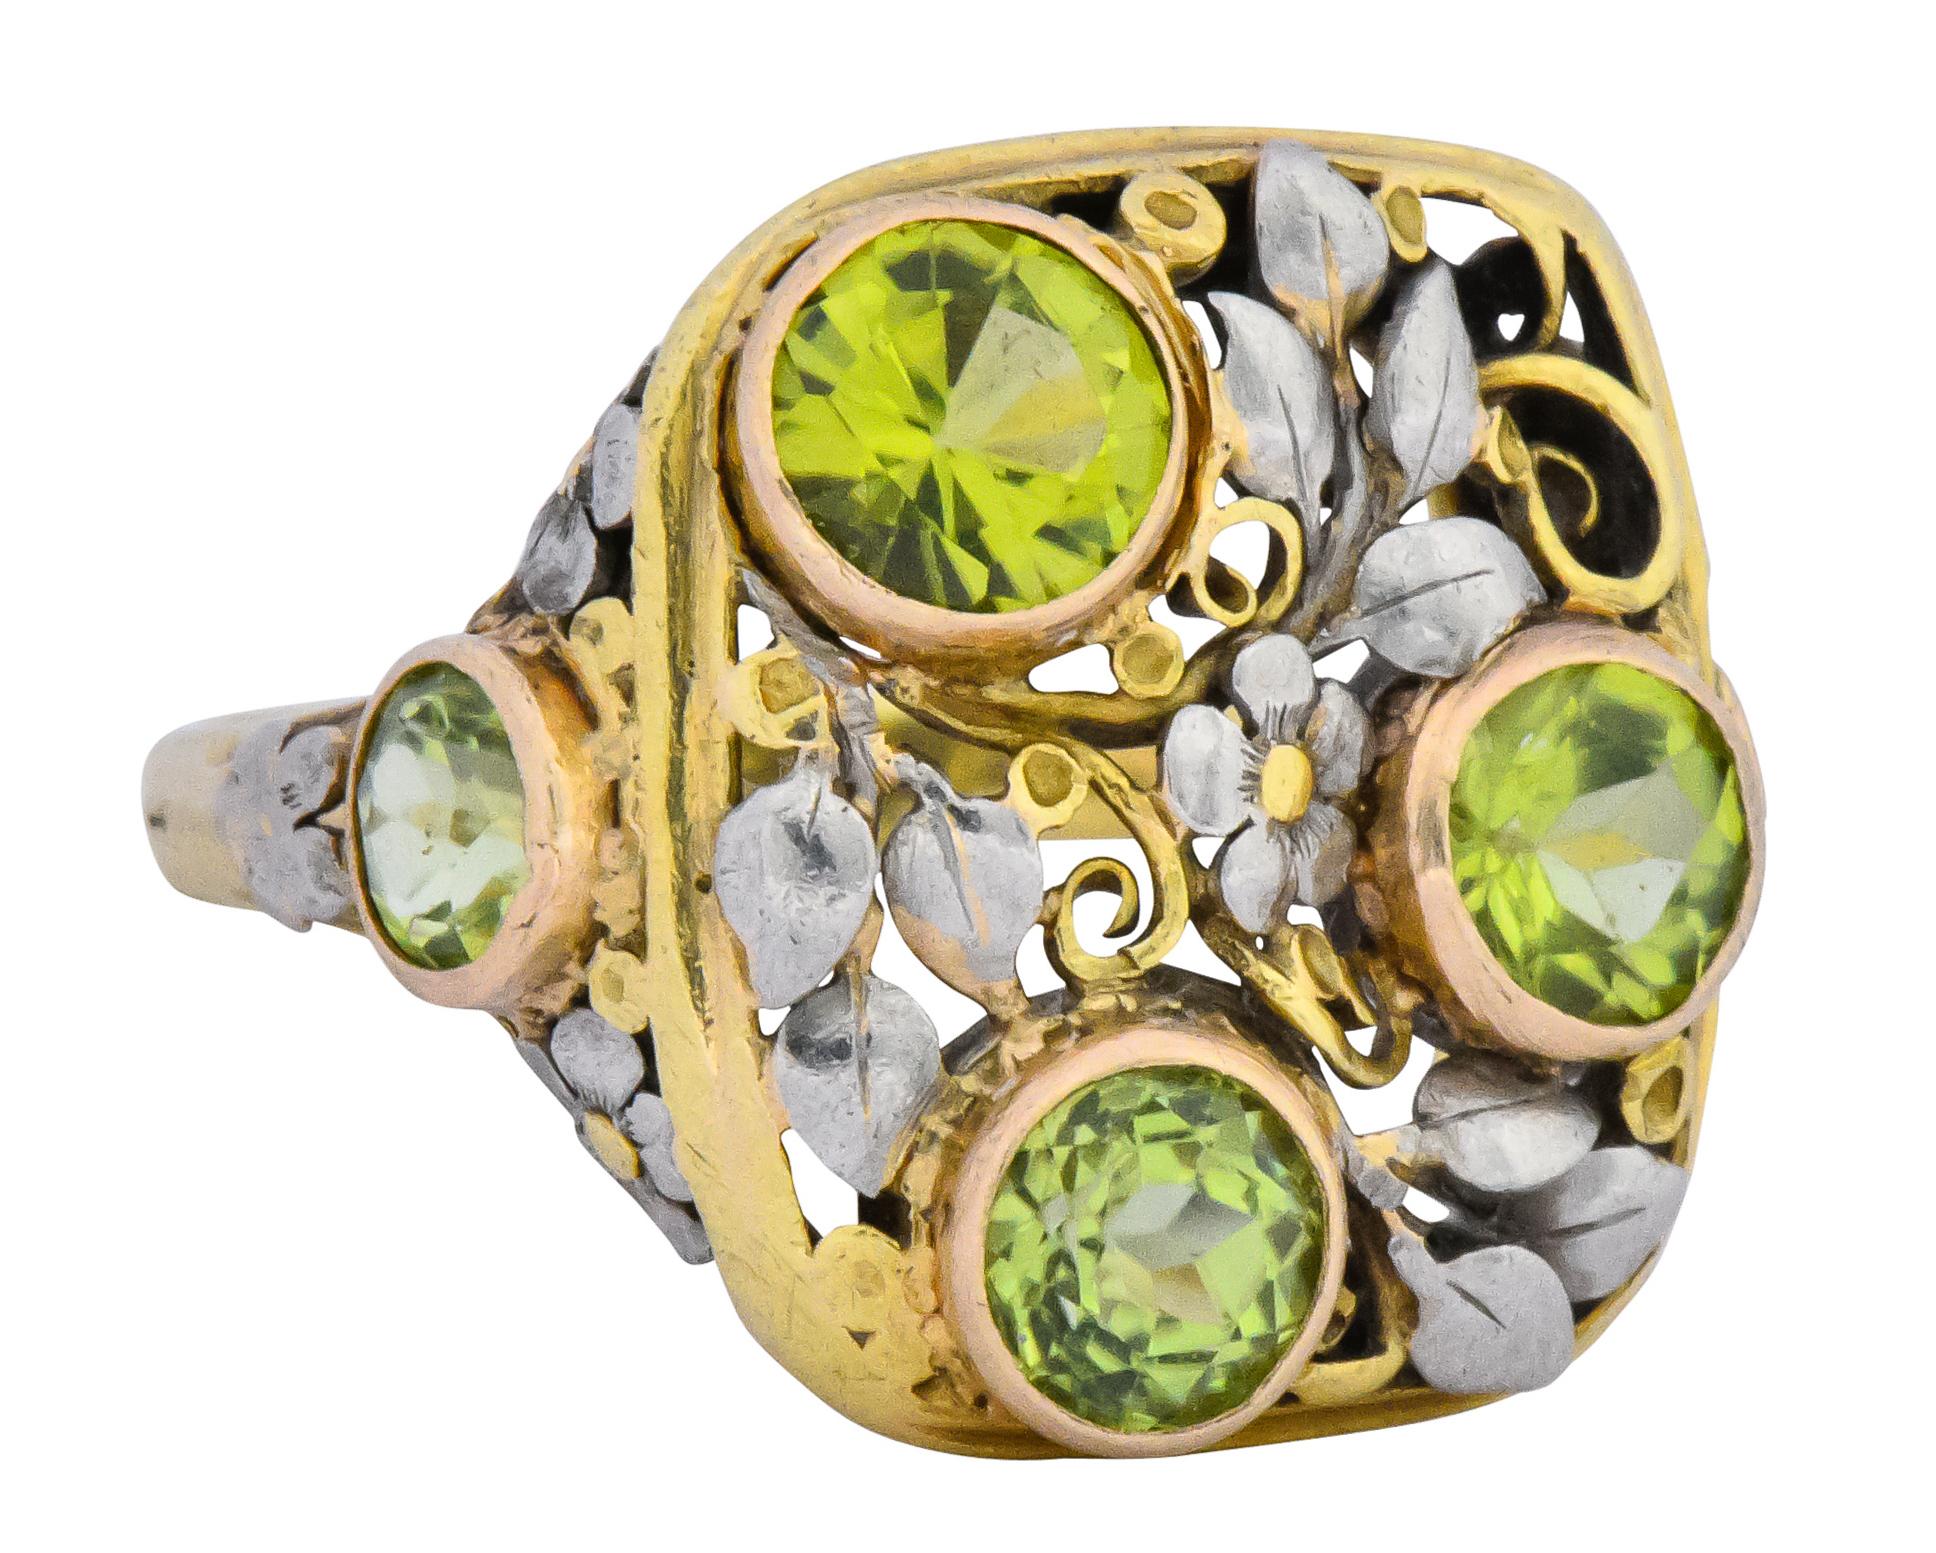 Yellow gold rectangular pierced design with white gold florals and foliate that continue onto shoulders

With five round cut peridot, bezel set in rose gold, weighing approximately 2.15 carats total, vibrant yellowish-green in color

Tested as 18